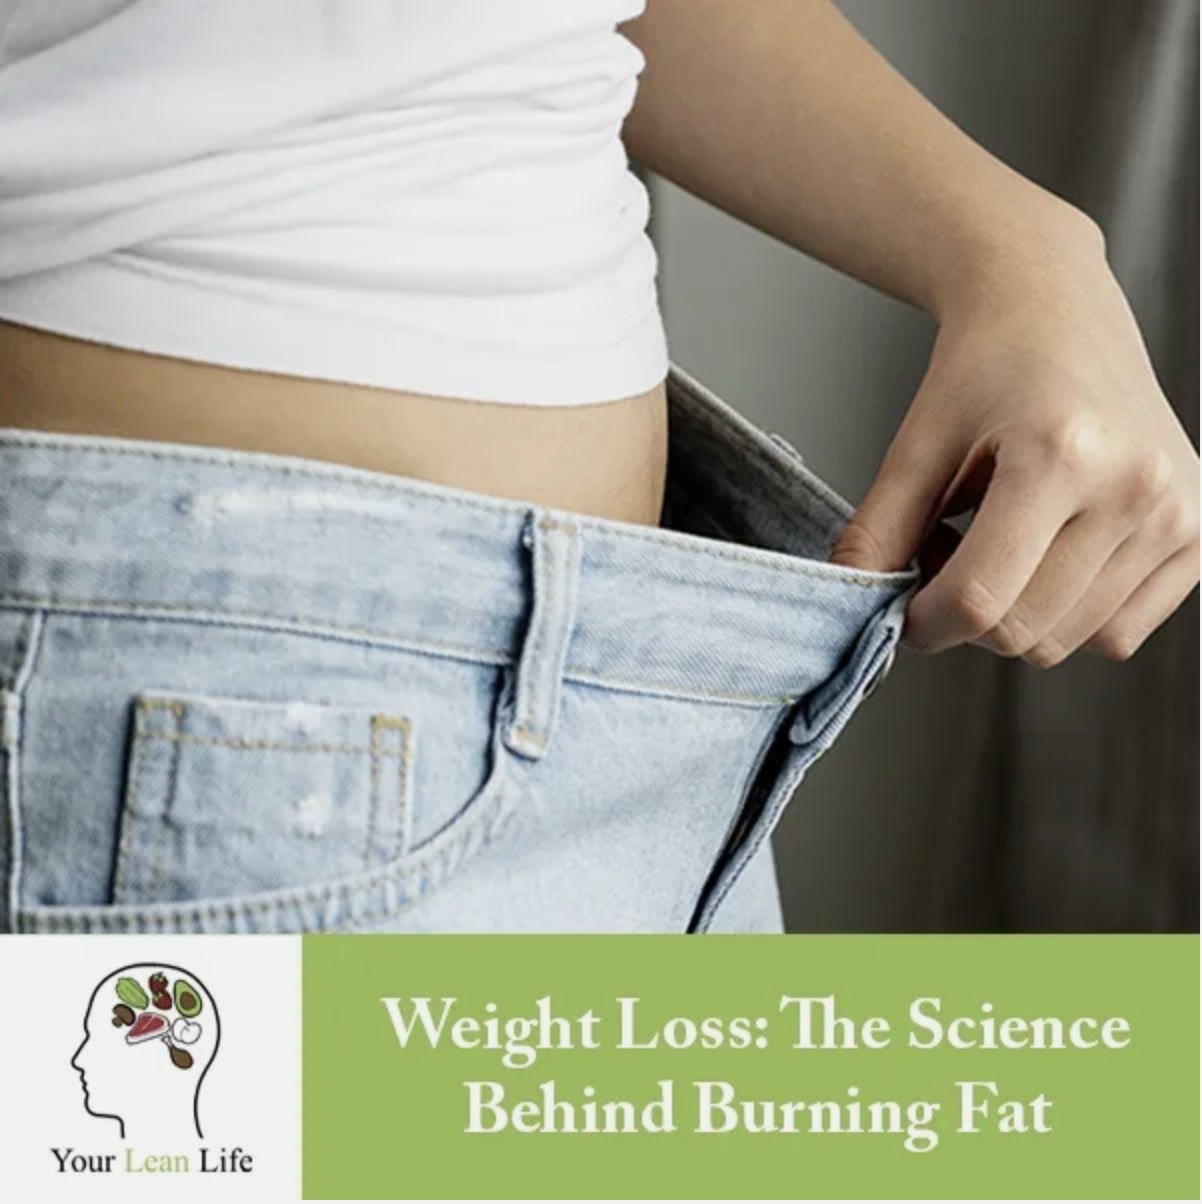 Weight Loss: The Science Behind Burning Fat